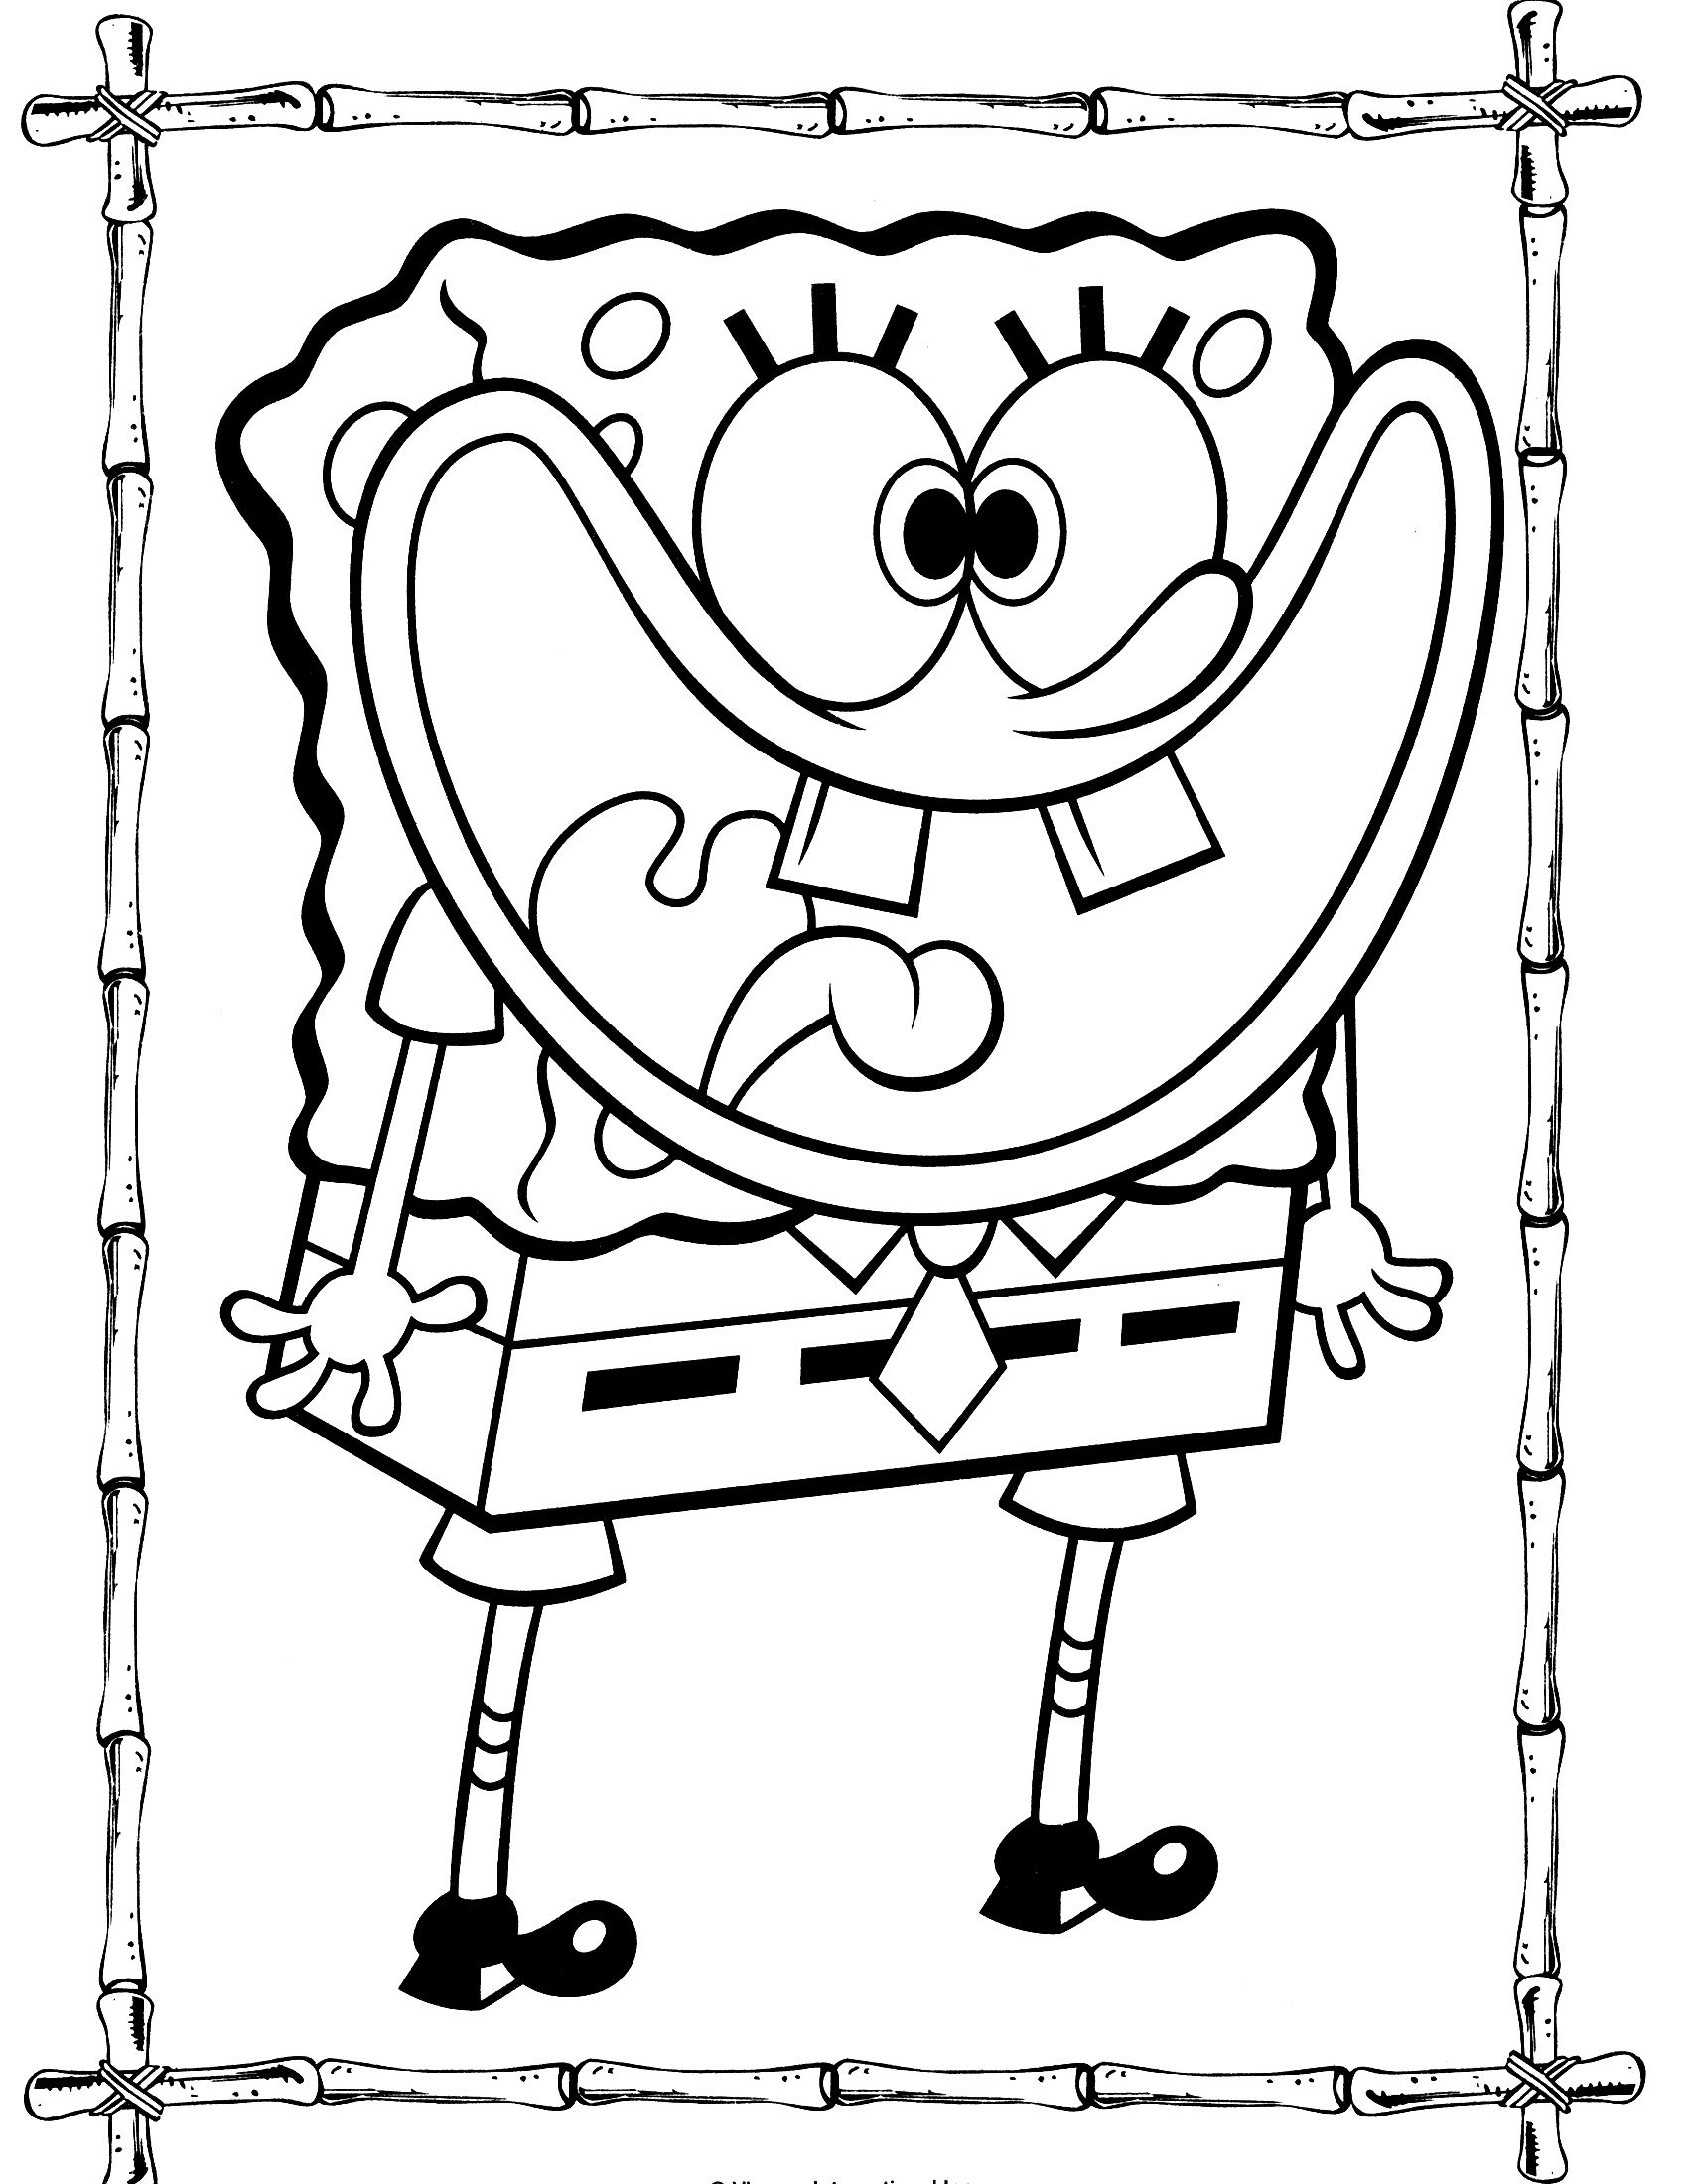 Funny Spongebob Coloring Pages Printables 1